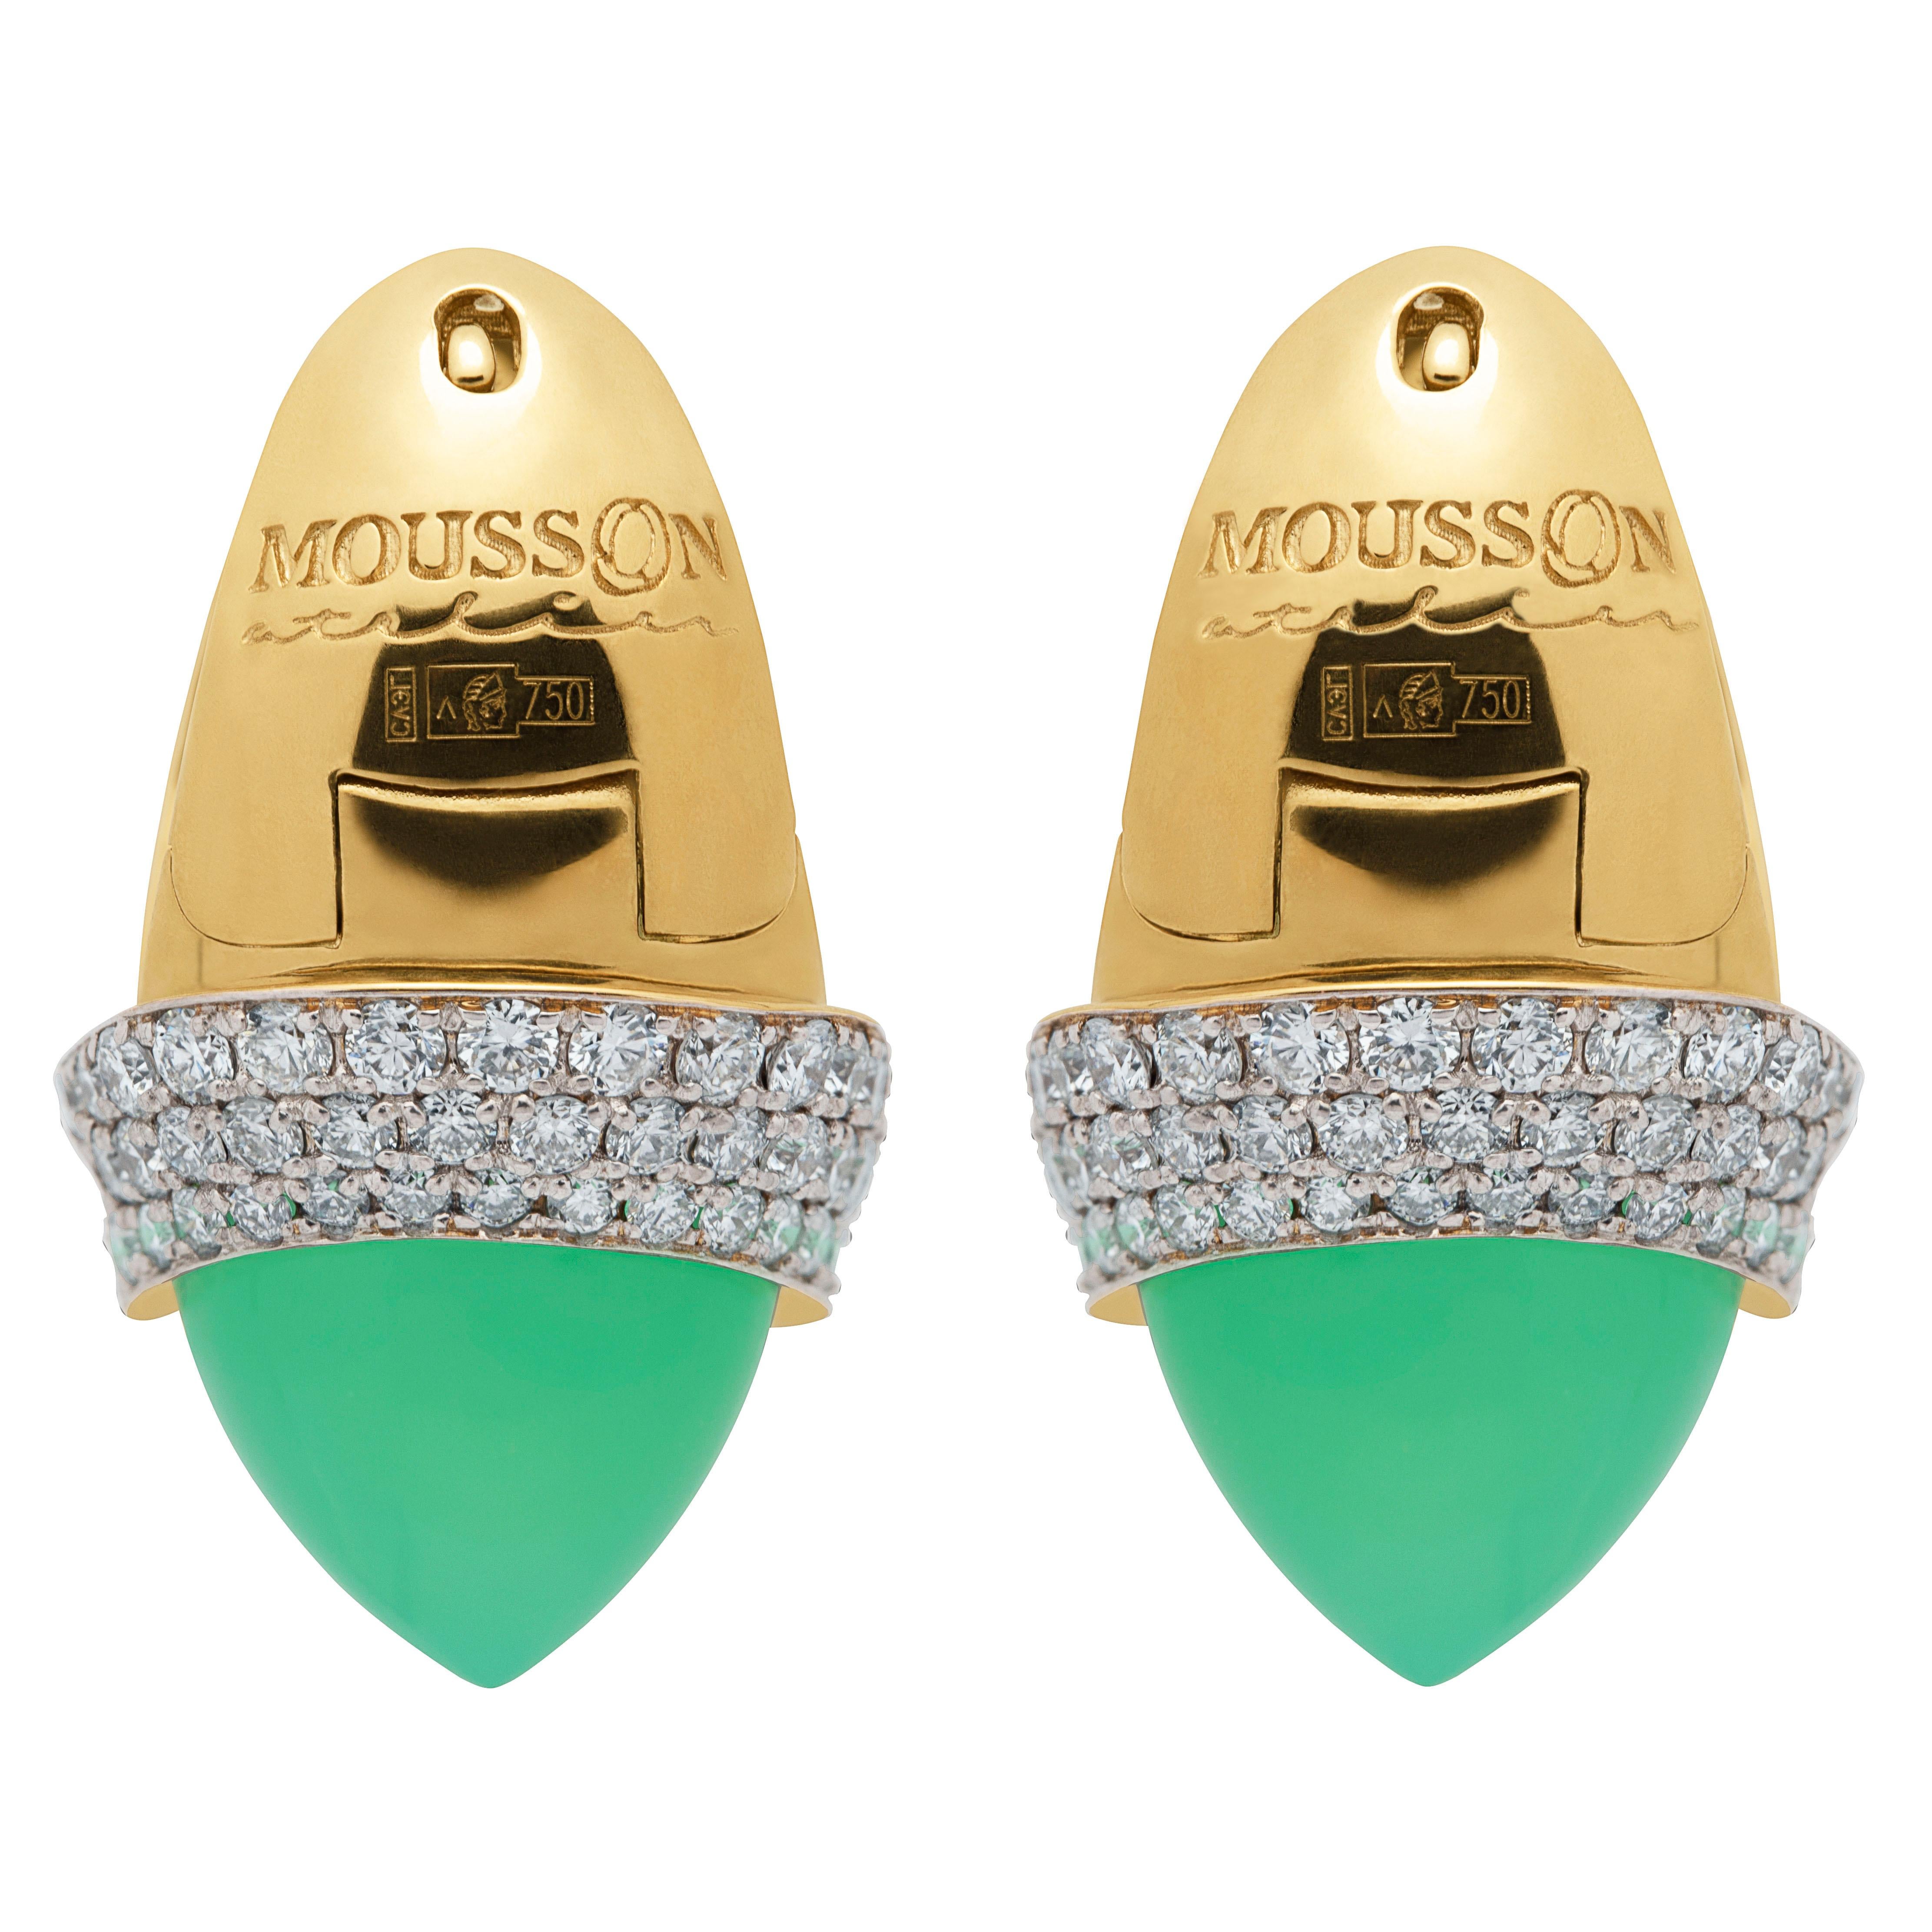 Chrysoprase 6.60 Carat Tsavorites Diamonds 18 Karat Gold Fuji Earrings
Series of these Earrings isn't called Fuji for nothing, since the inspiration for the creation of these products came to us exactly from the contemplation of this majestic